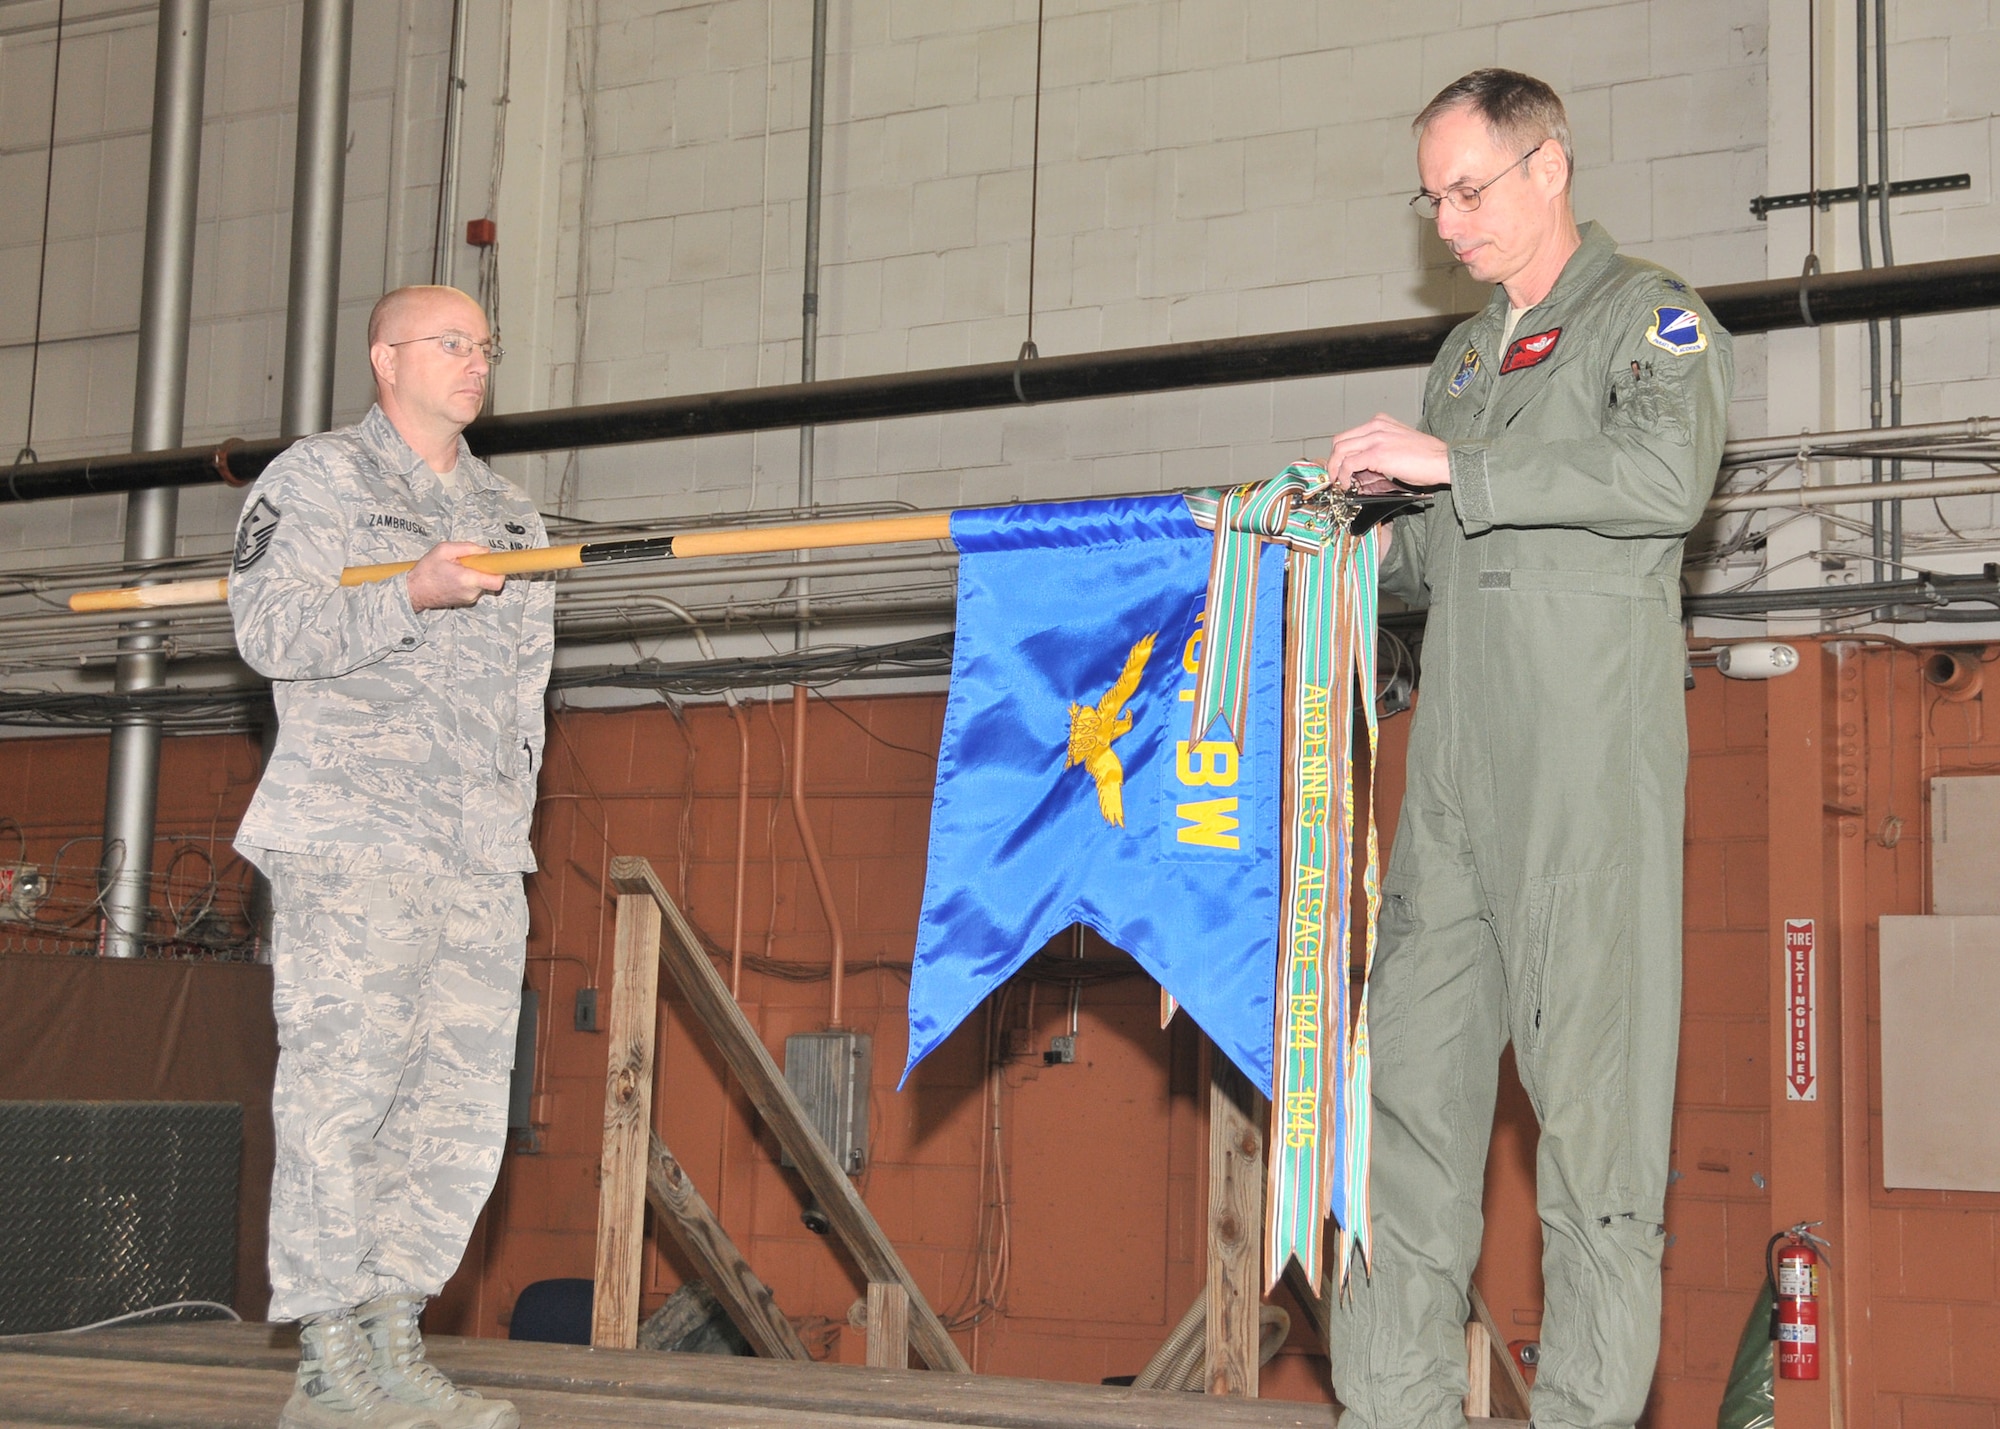 131st Bomb Wing Commander Col. Greg Champagne affixes the Air Force Outstanding Unit Award streamer to the 131st Bomb Wing unit flag while Master Sgt. David Zambruski stands by, Feb 11. The 131st was awarded this high honor for exceptionally meritorious service from 1 June 2008 to 31 May 2010. (Photo by Senior Master Sgt. Mary-Dale Amison)